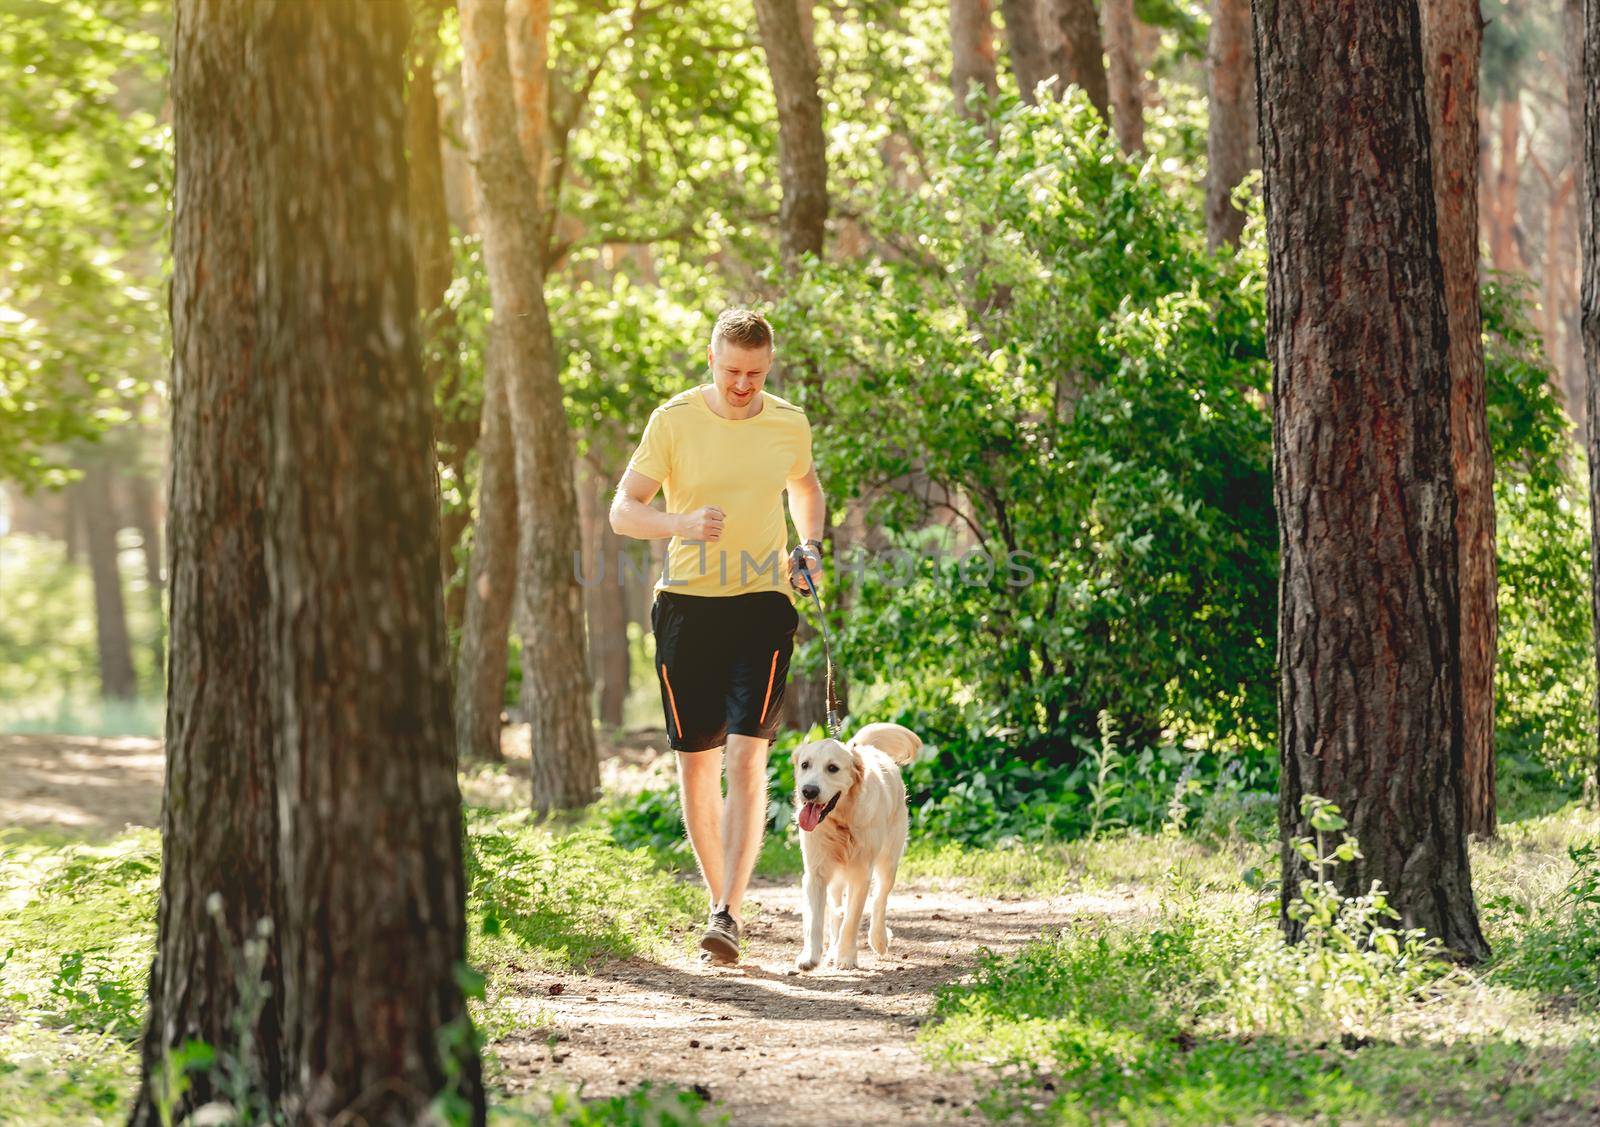 Handsome man jogging with golden retriever dog in pine wood